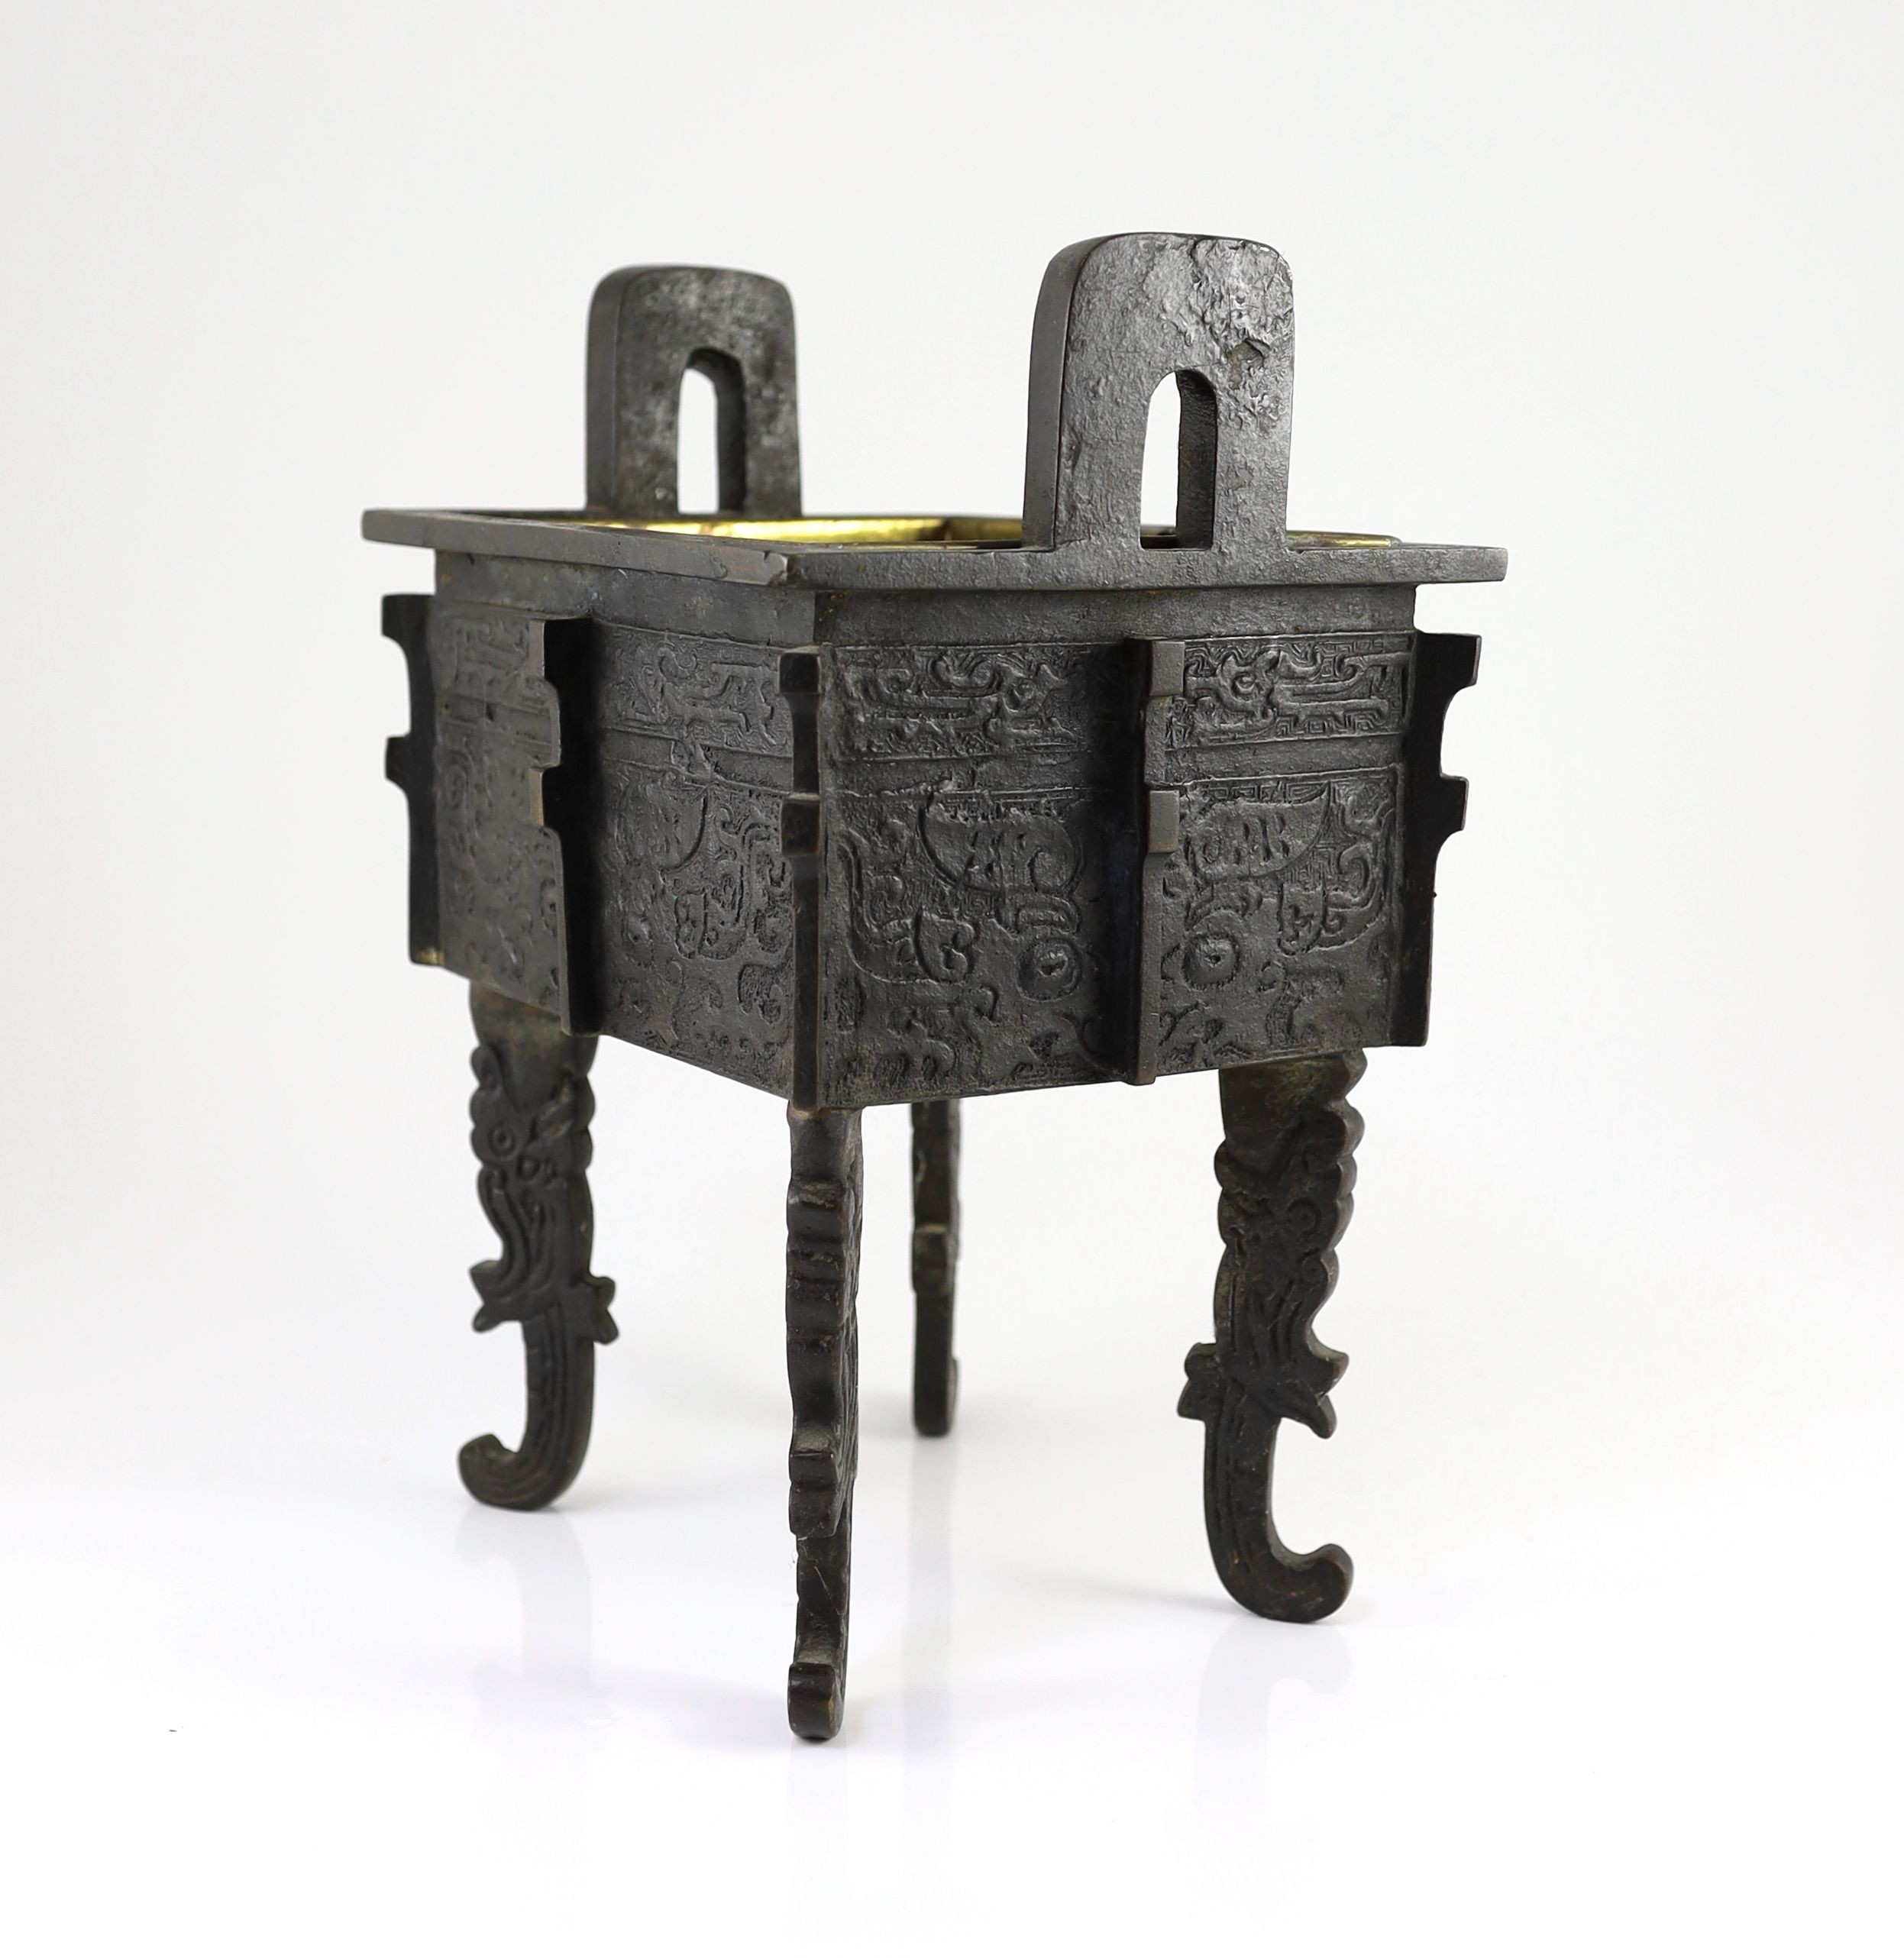 A Chinese archaistic bronze rectangular censer, fangding, 17th/18th centurydecorated in low relief - Image 3 of 6